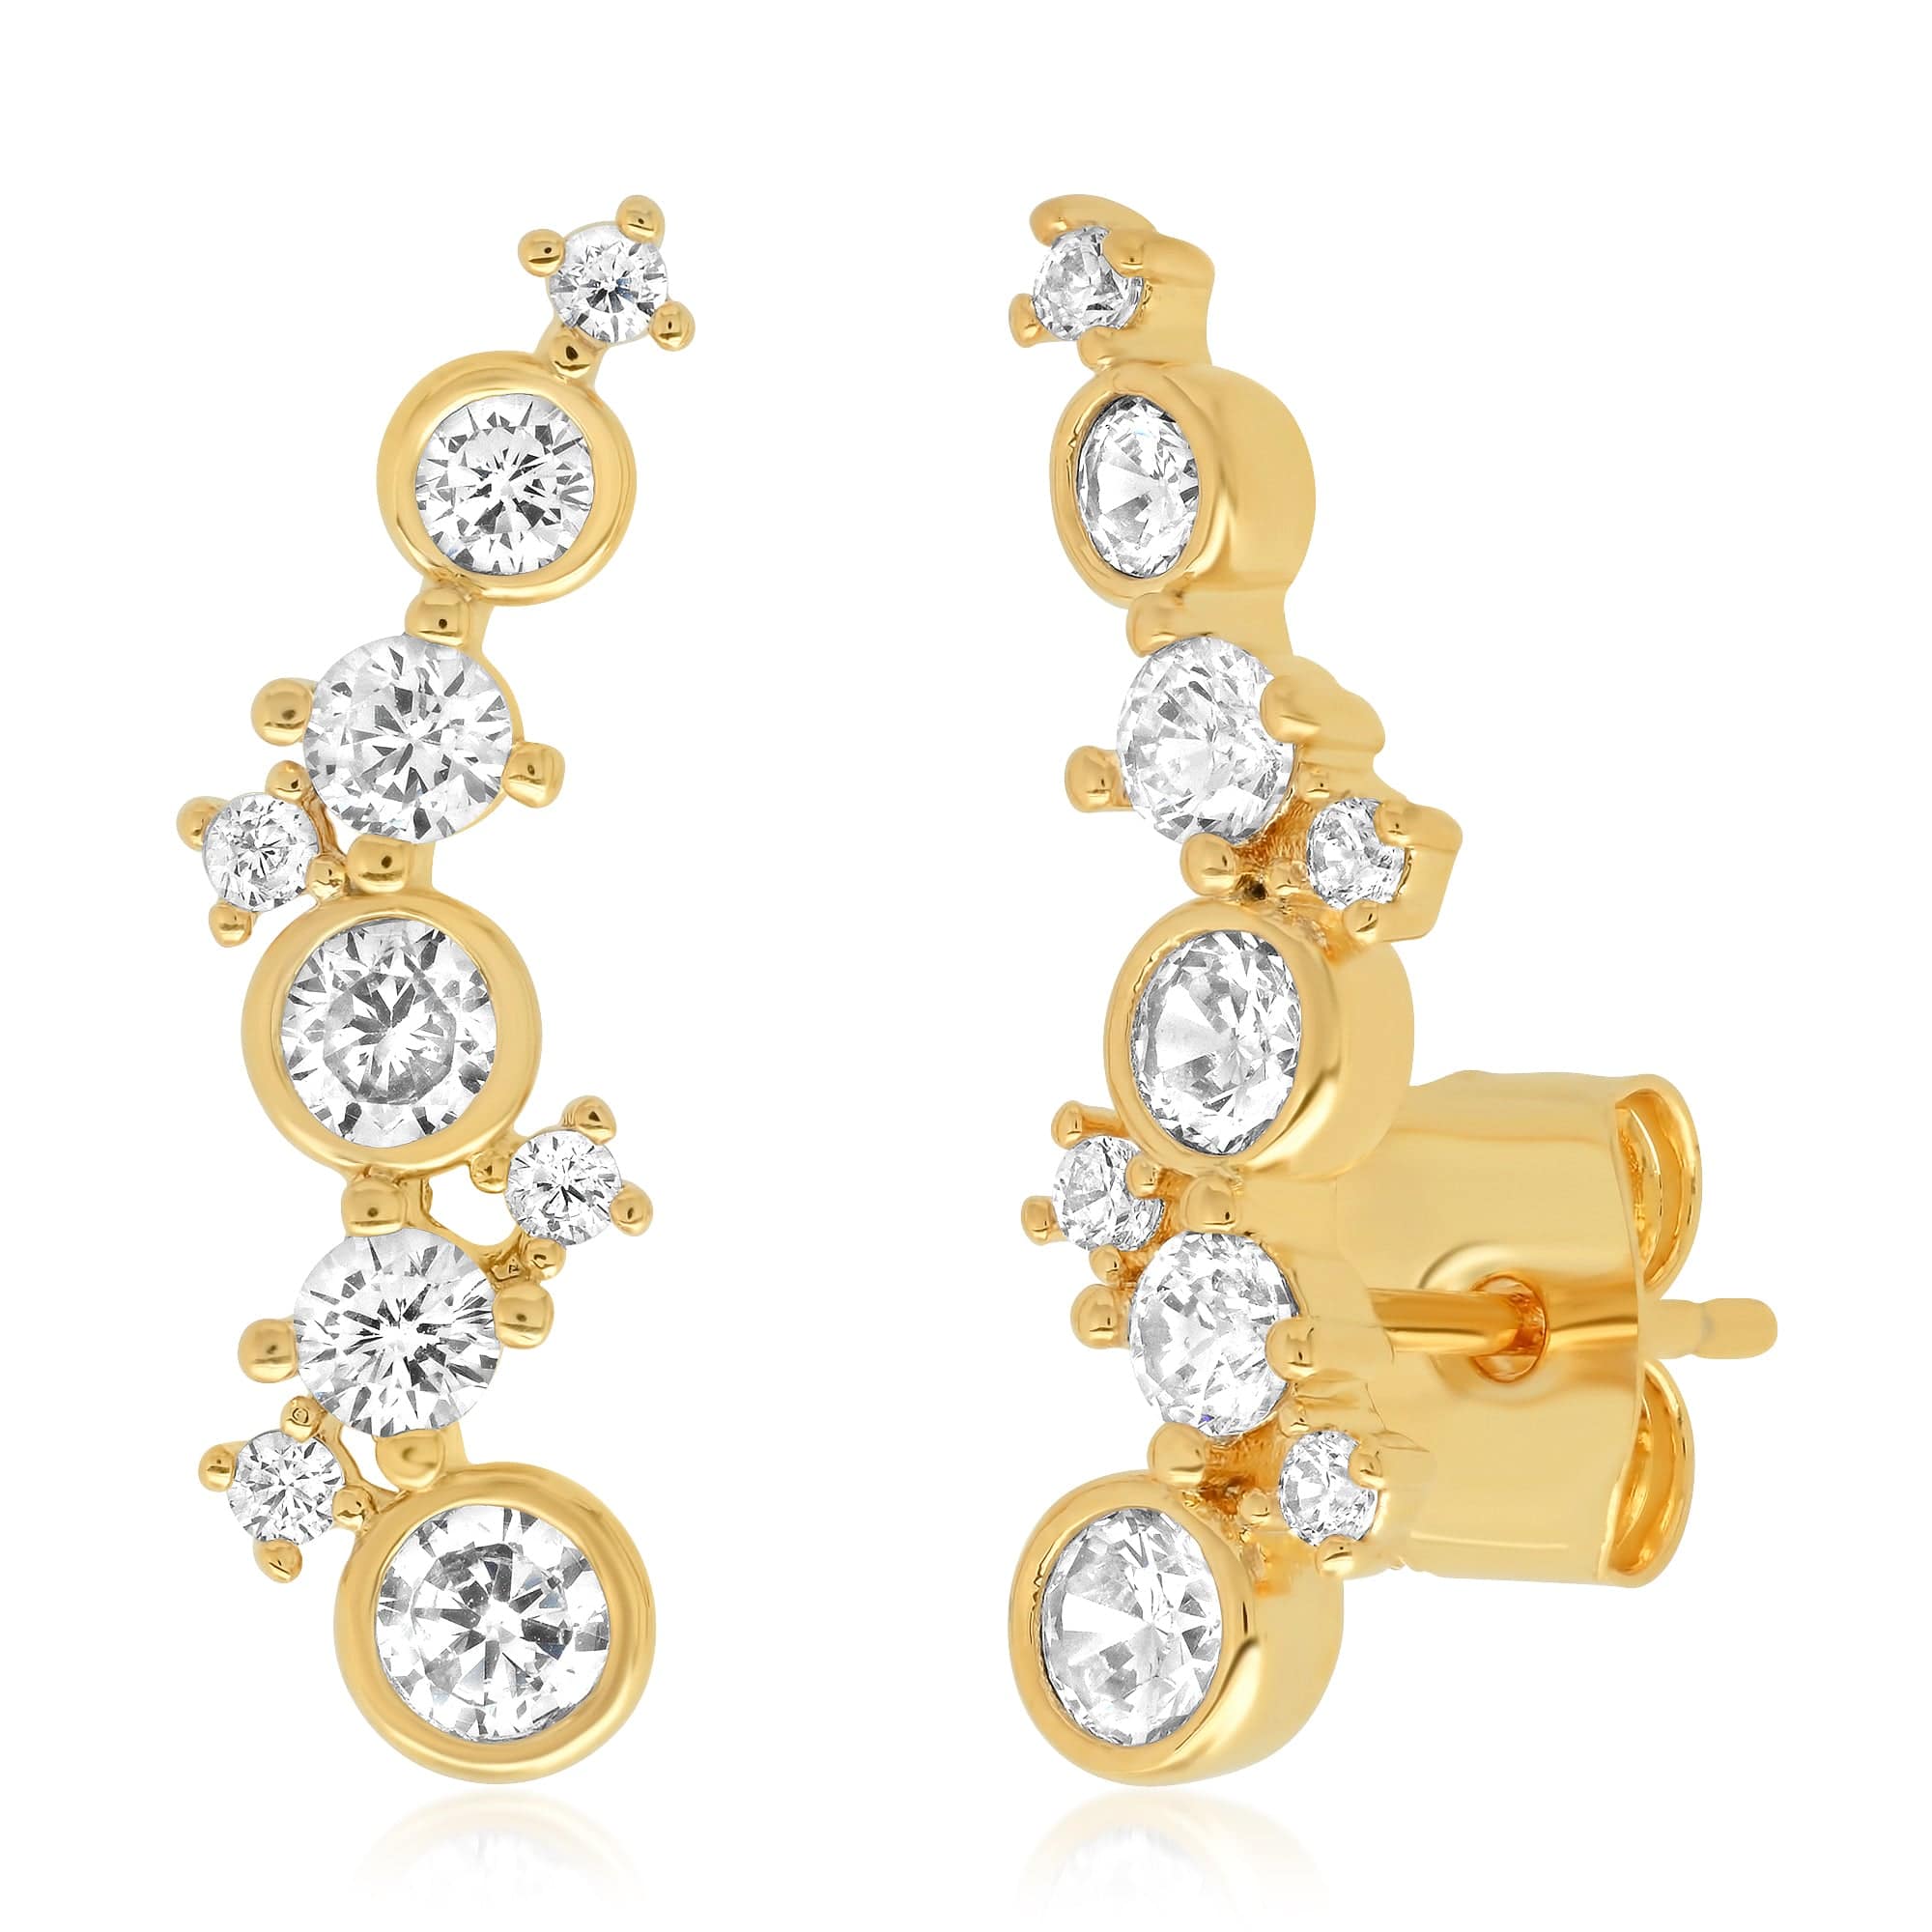 TAI JEWELRY Earrings Elegant Gold Climbers With Cz Accents